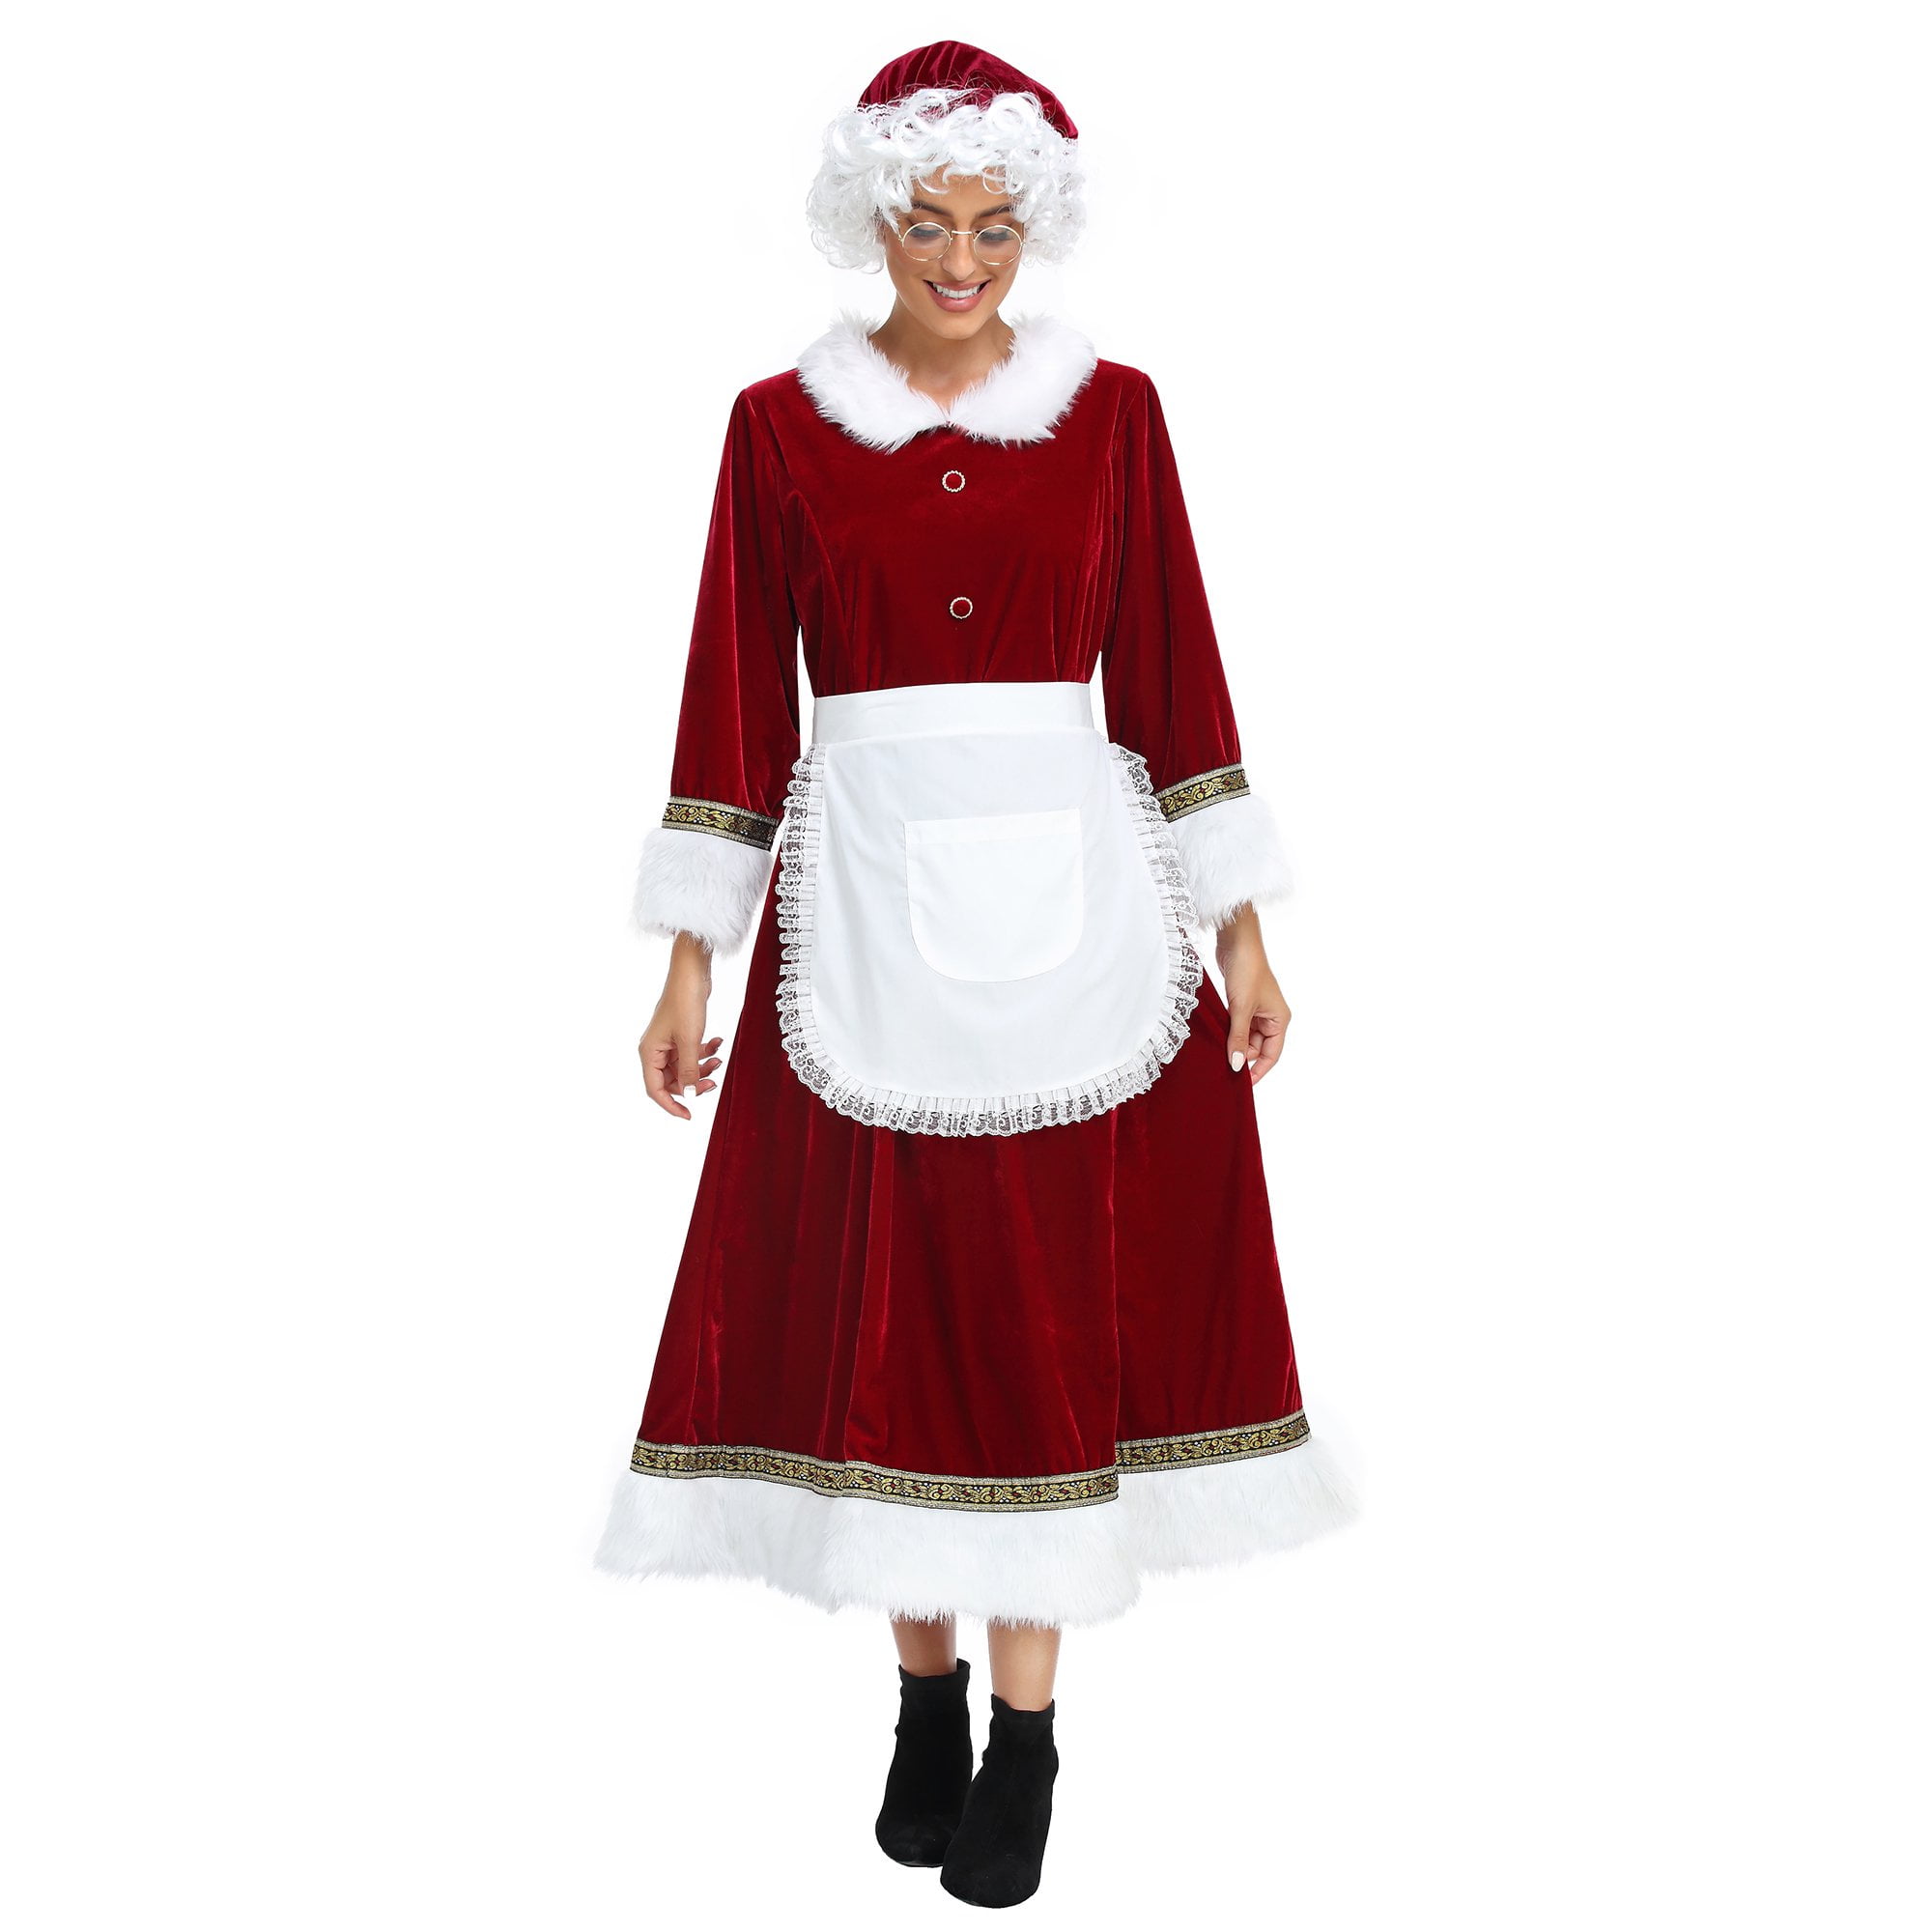 Mrs. Claus Costume for Women Adult Christmas Plus Size Dress with Bonnet Apron White Hair Wigs and Wire Rim Glasses -S - Walmart.com